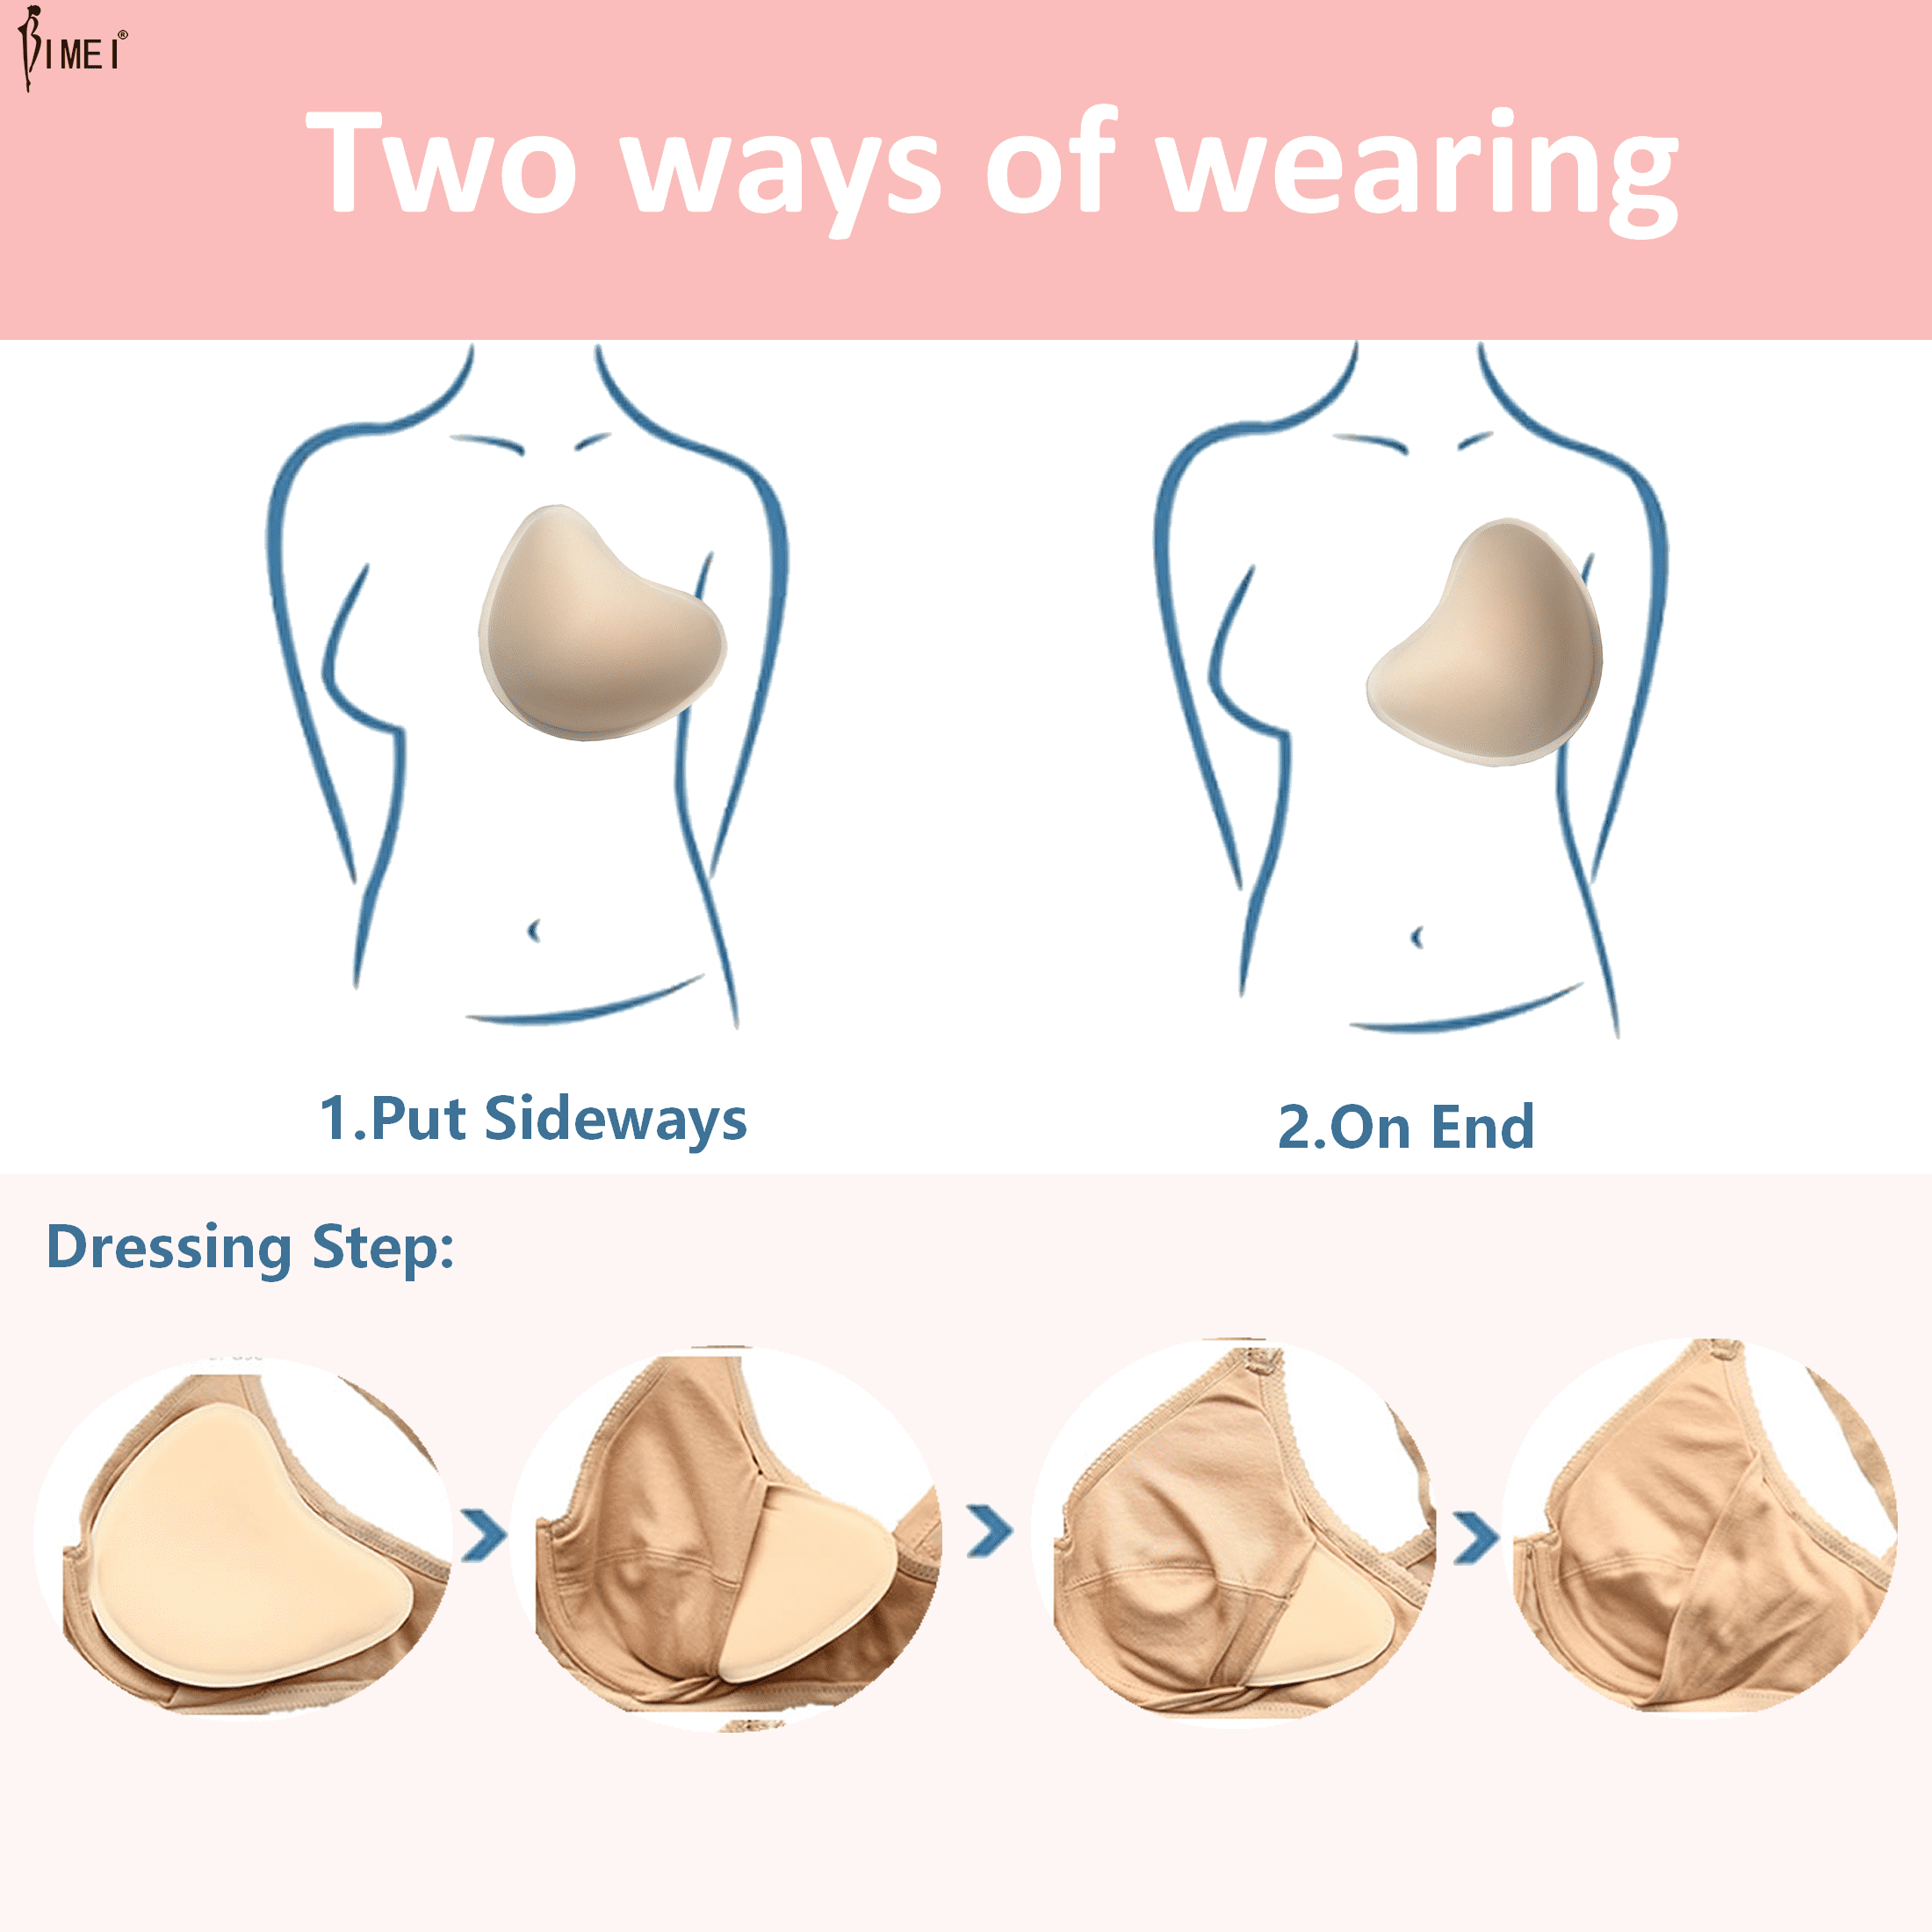 How to take care of your breast forms - The Breast Form Store